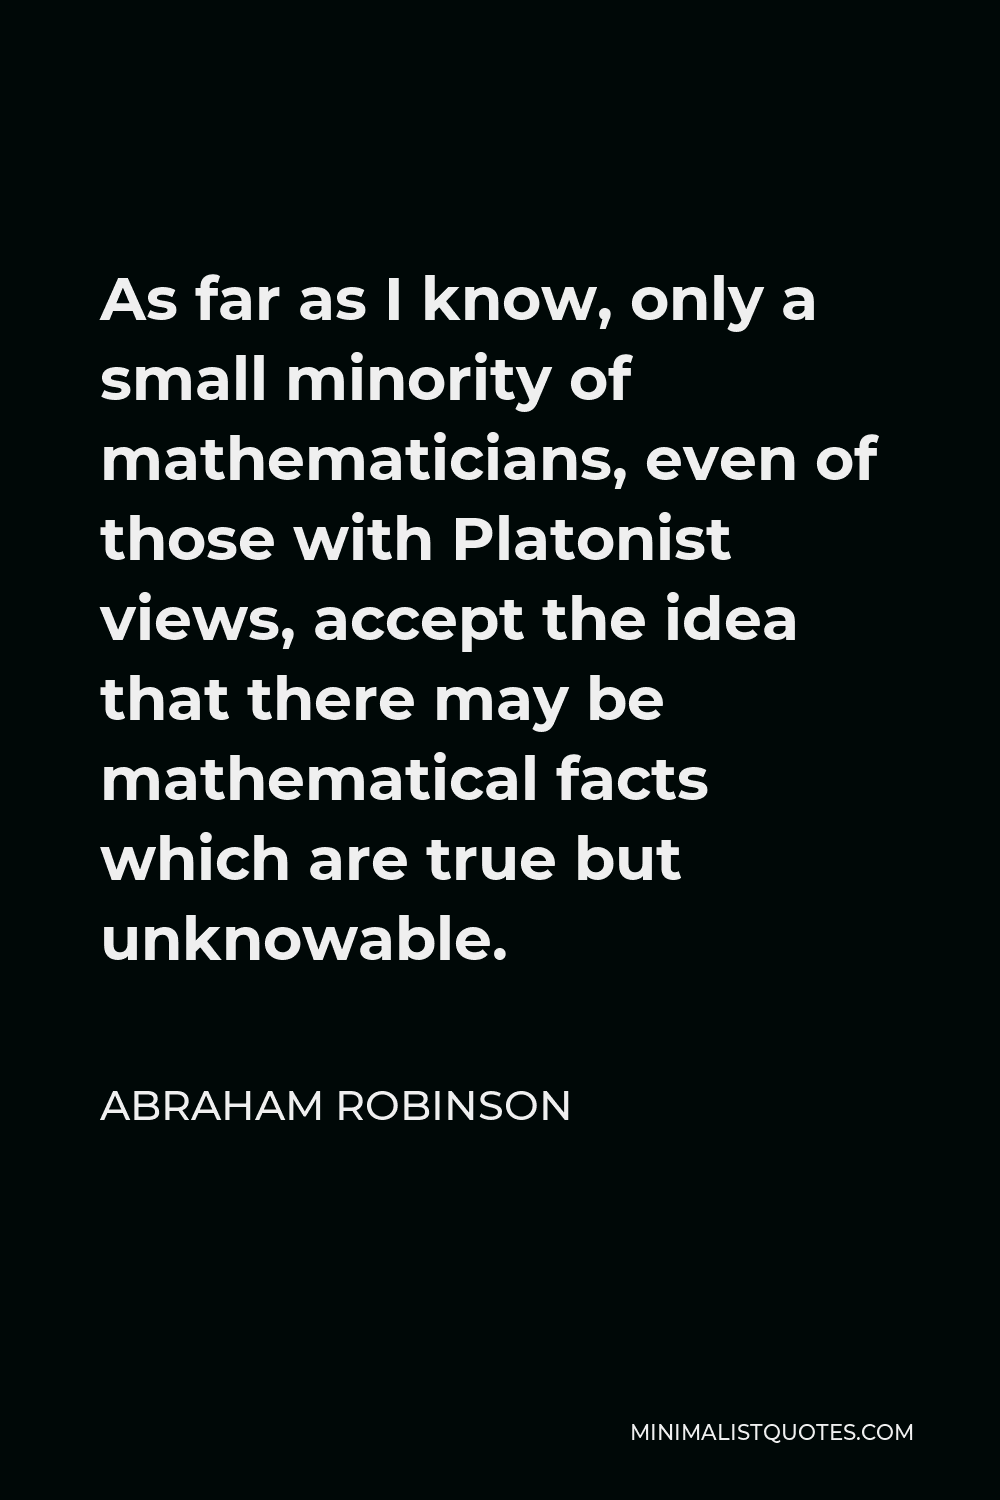 Abraham Robinson Quote - As far as I know, only a small minority of mathematicians, even of those with Platonist views, accept the idea that there may be mathematical facts which are true but unknowable.